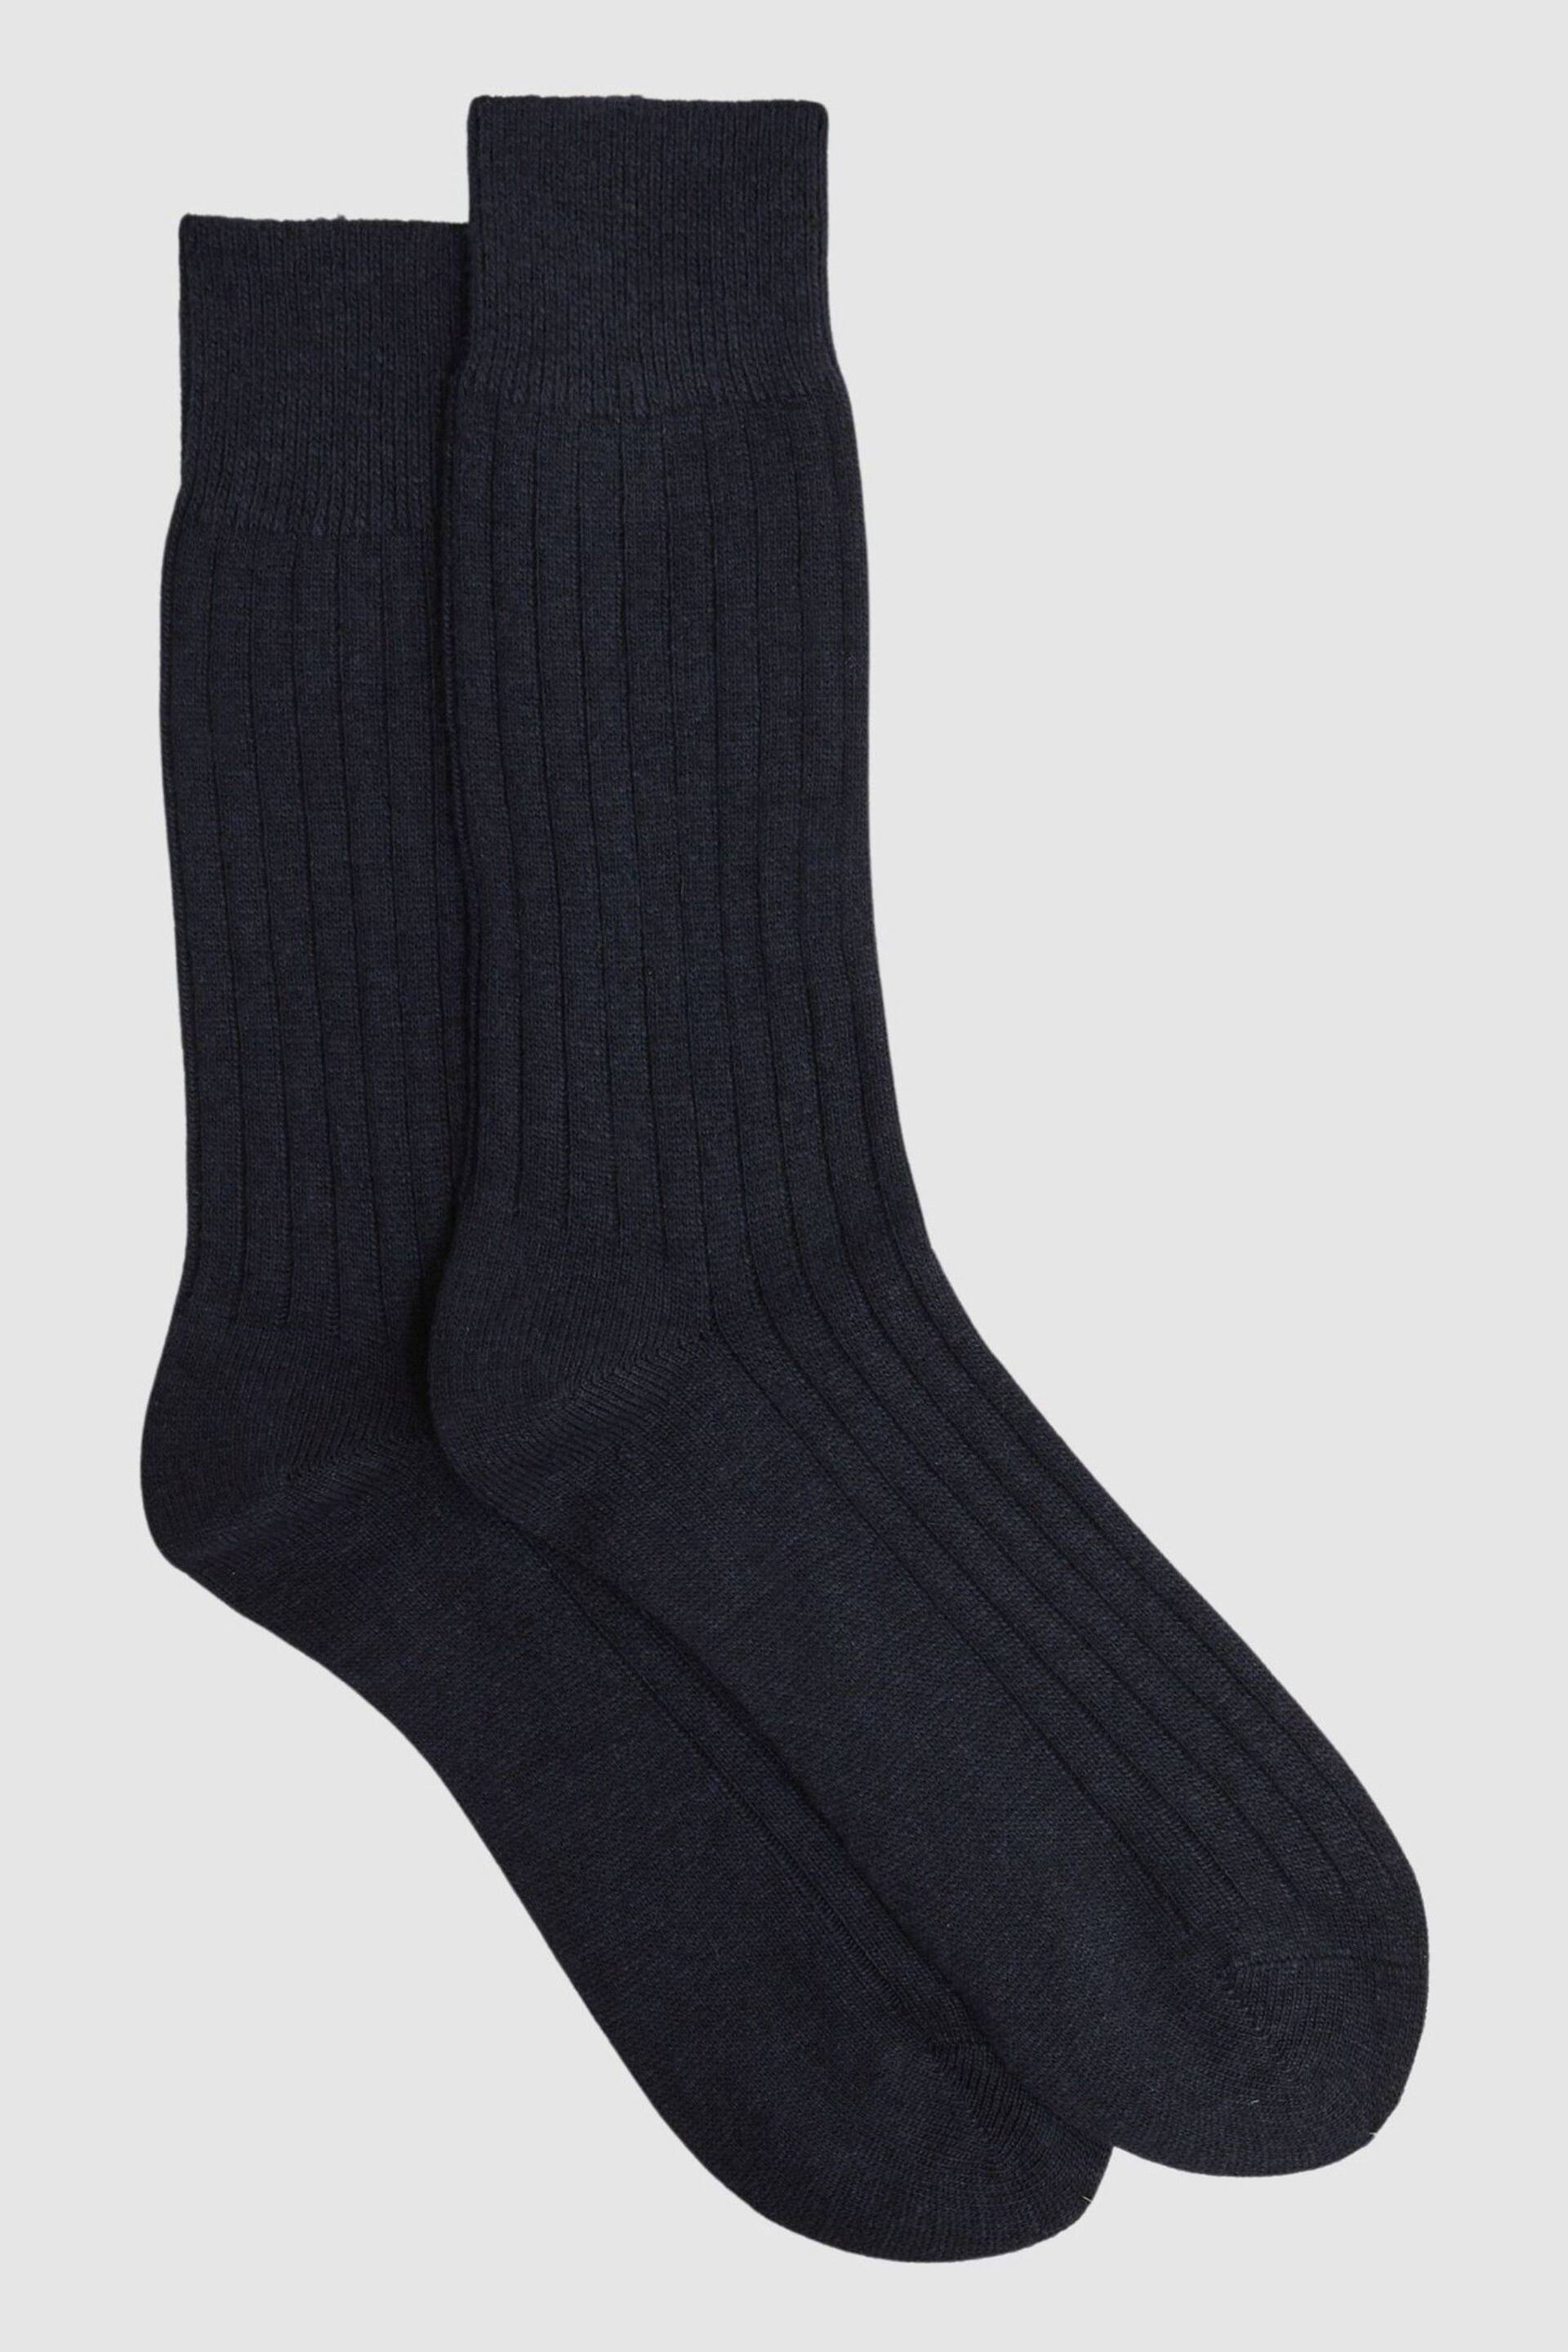 Reiss Navy Cirby Wool-Cashmere Blend Ribbed Socks - Image 1 of 3